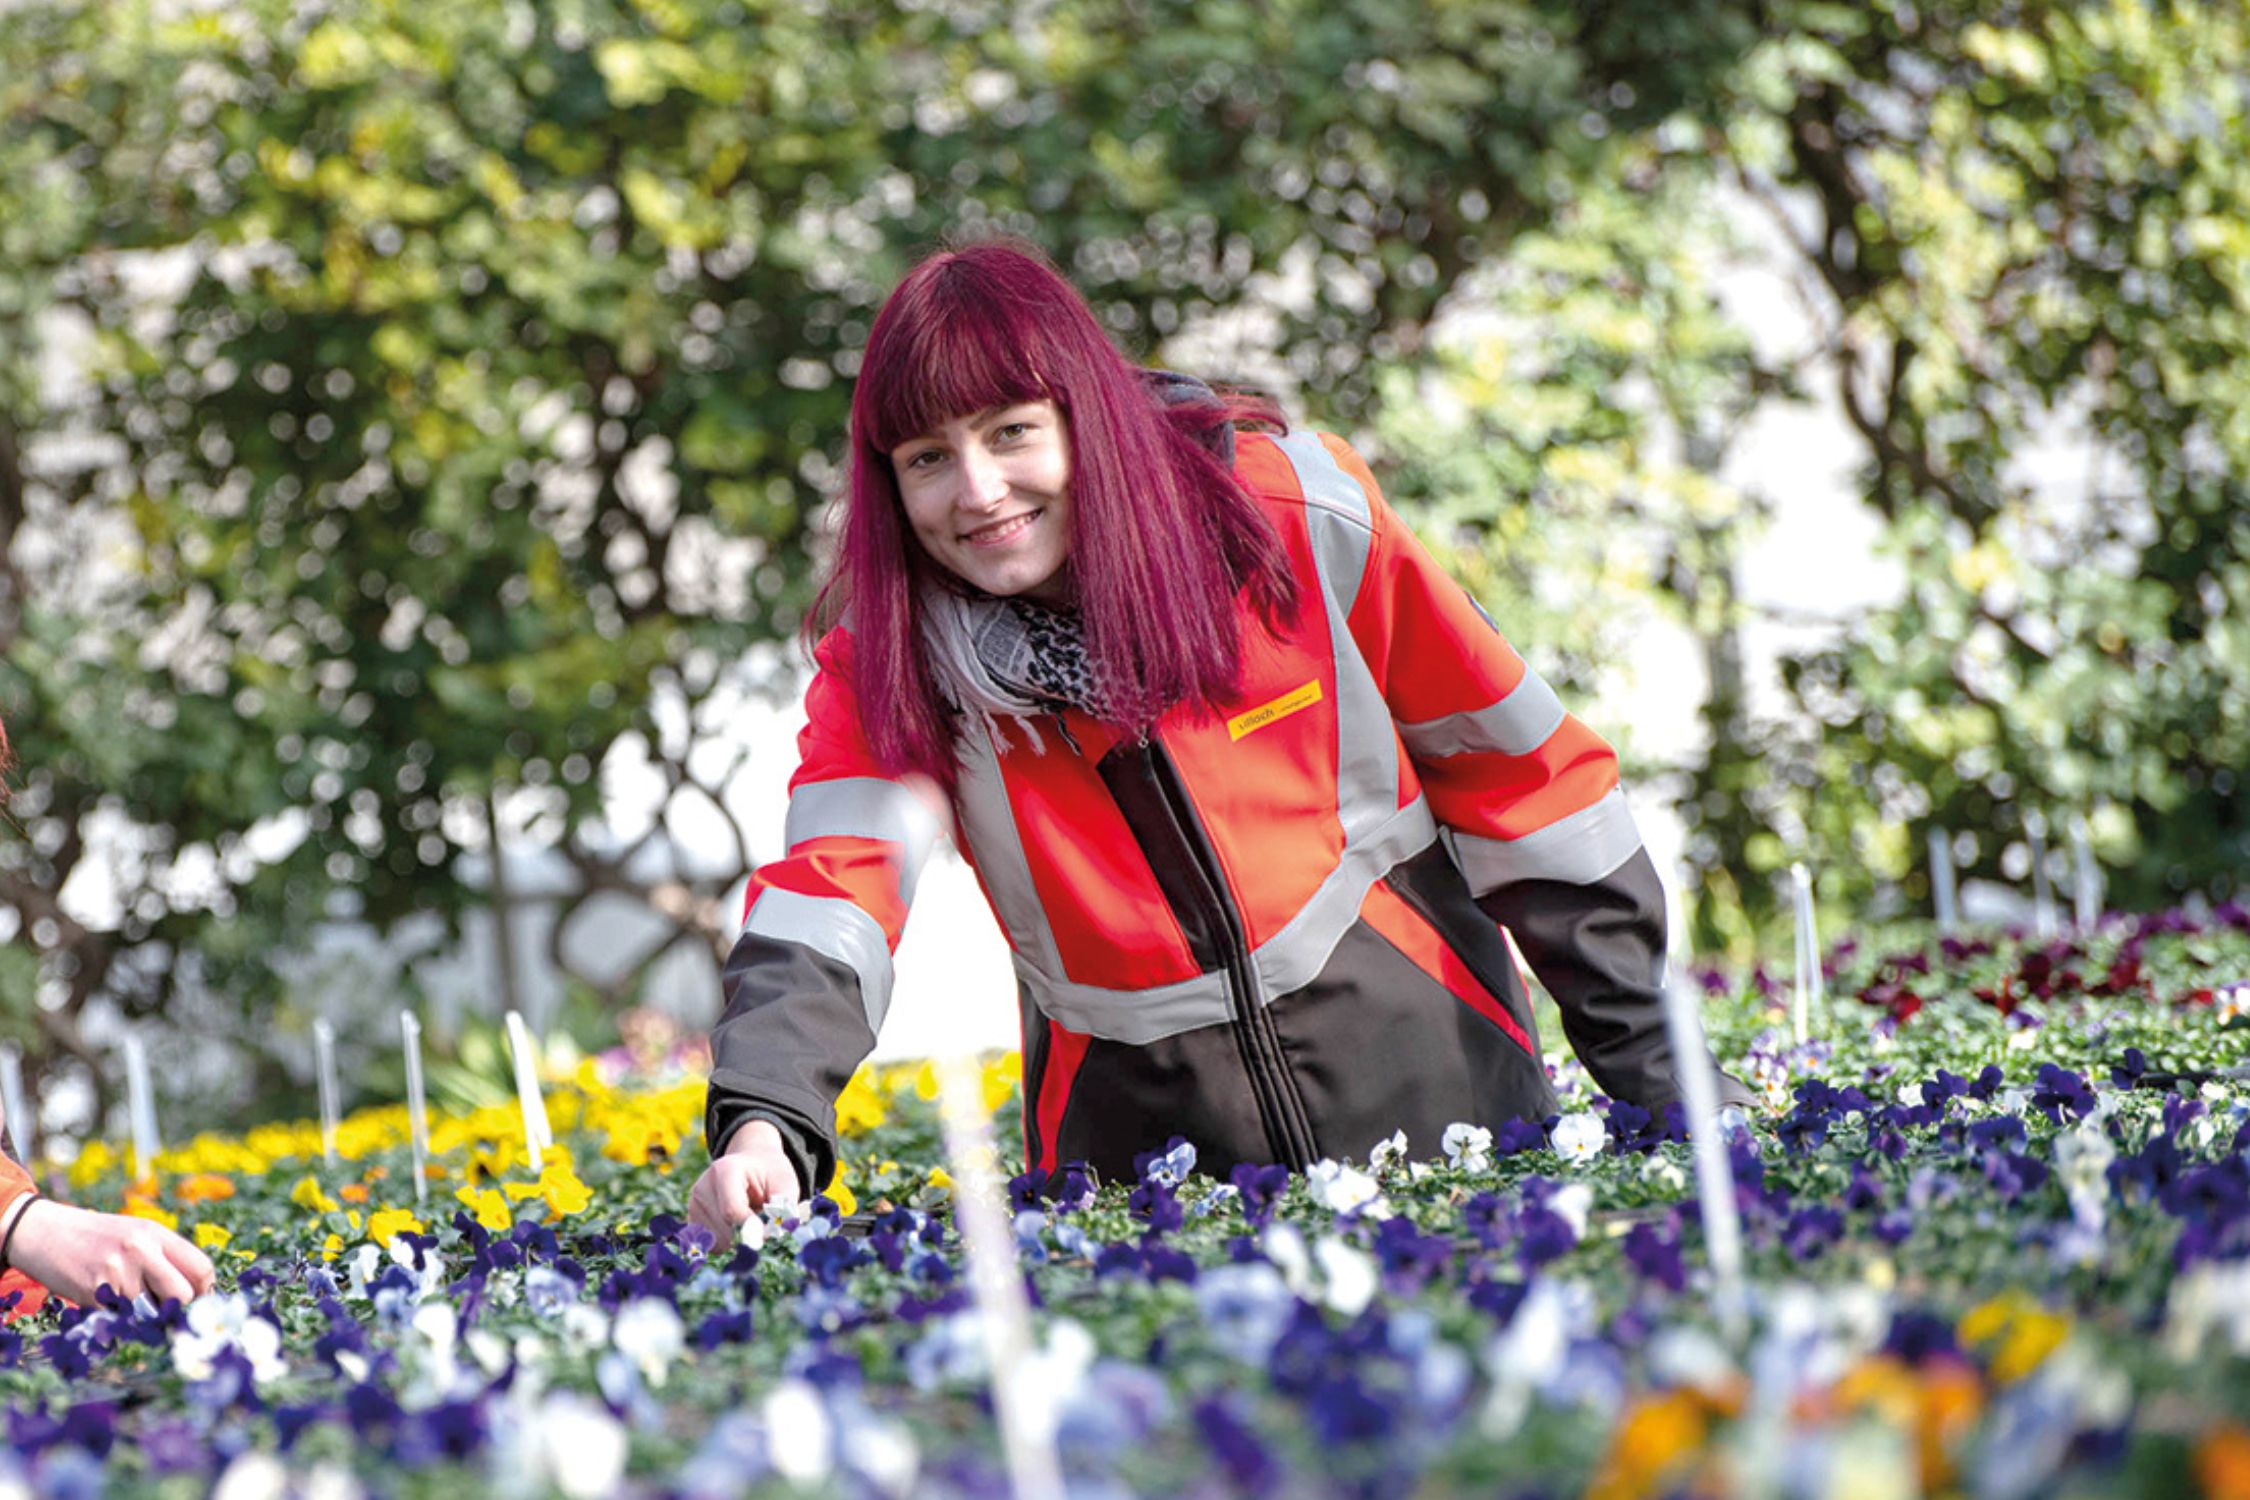 Employee of the department Stadtgrün plants the first spring flowers